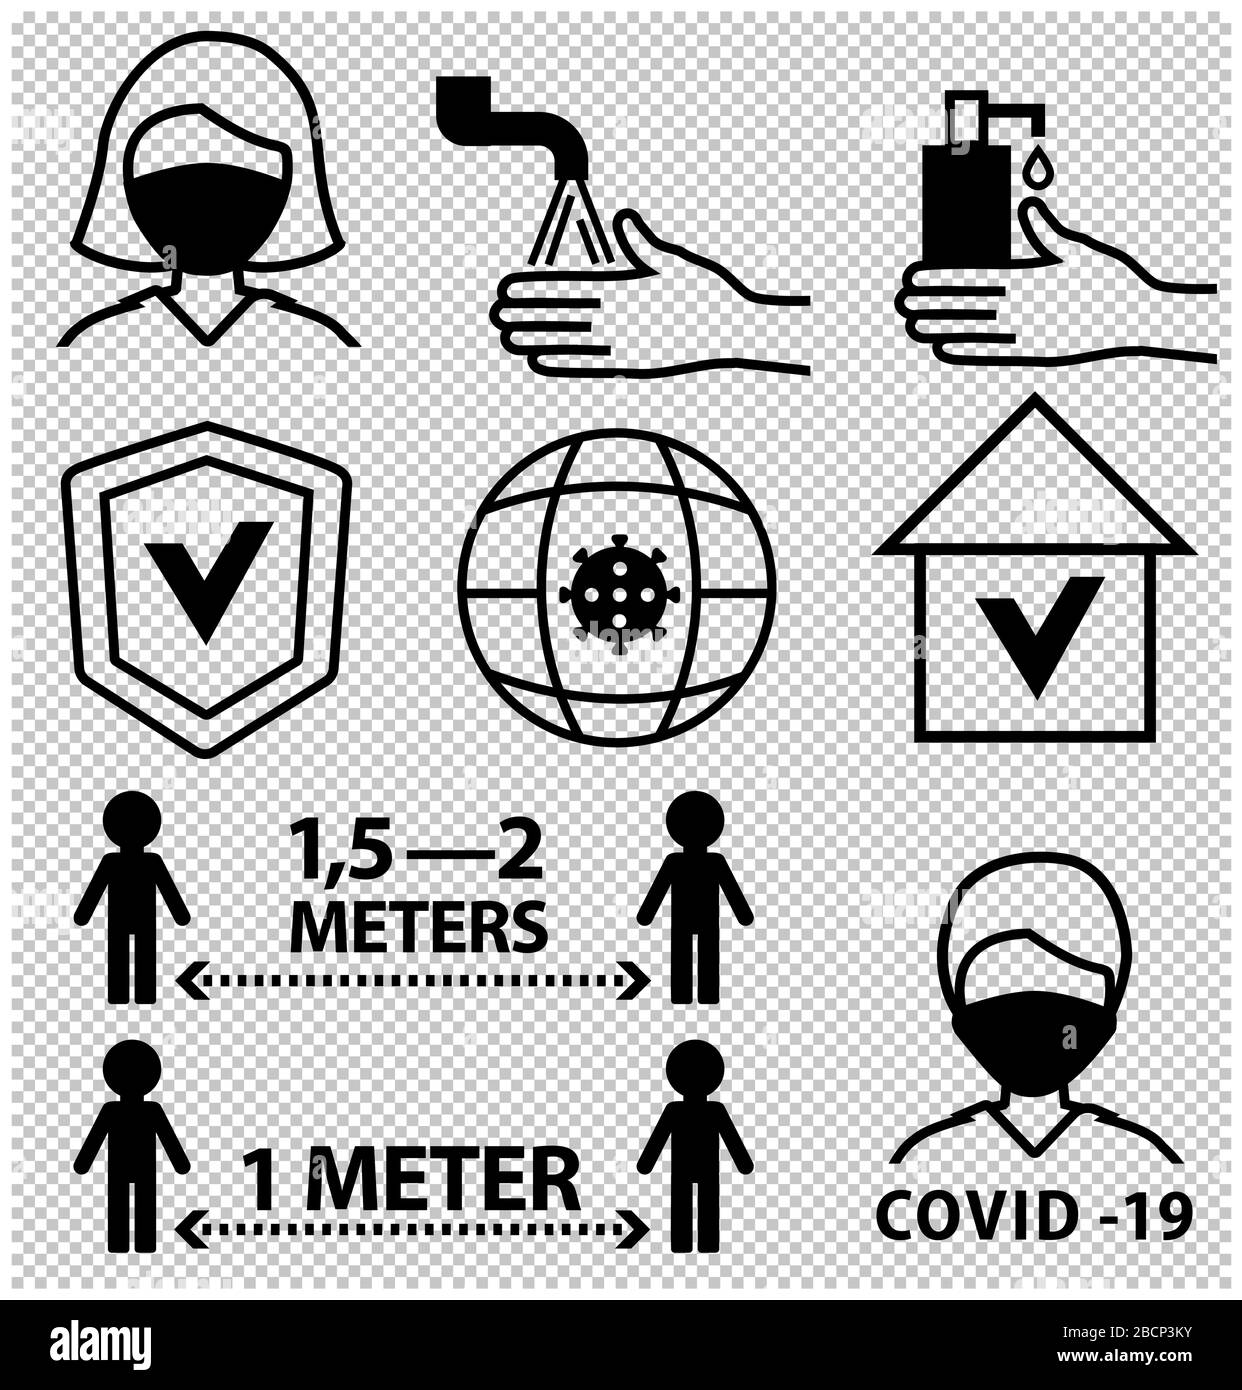 Line black icons. Keep distance 1 meter. Prevention COVID-19. Coronavirus icon on transparent background Stock Vector